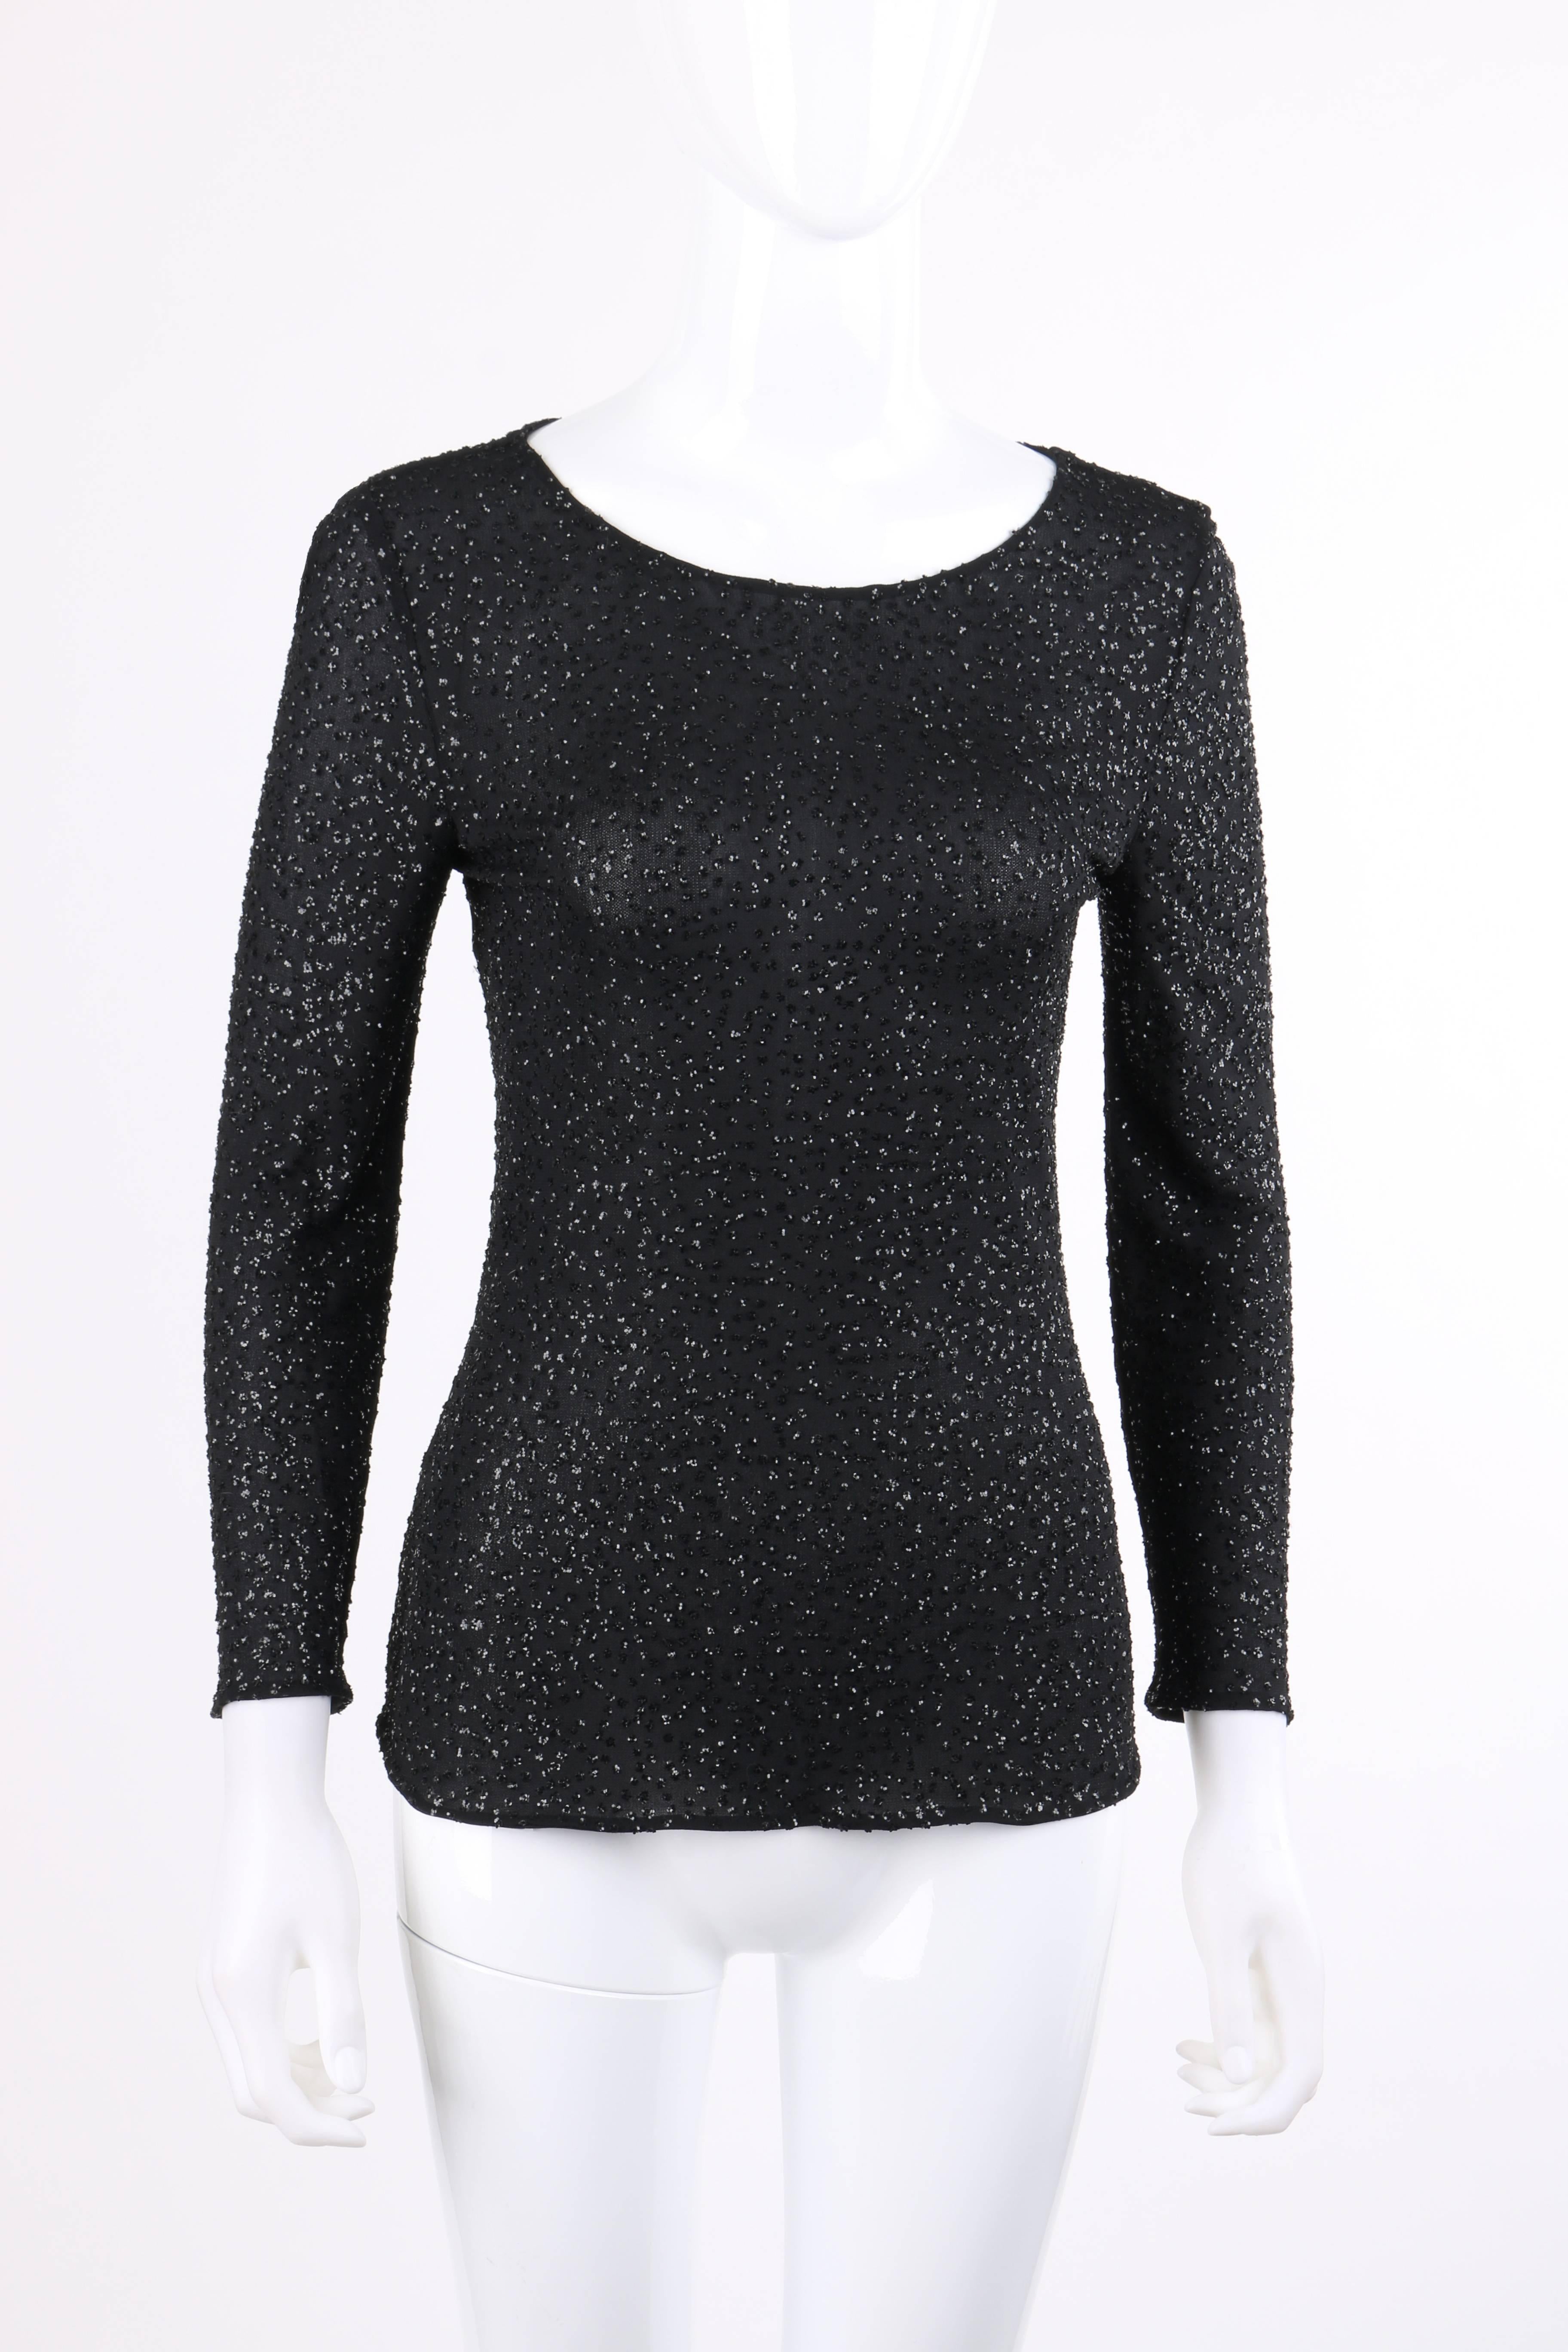 Valentino Boutique Autumn/Winter 2000 black metallic sequin knit scoop neck top designed by Valentino Garavani. Black semi-sheer knit with all over sequin clusters. 3/4 length sleeves. Wide scoop neckline. Center back invisible zipper with hook and